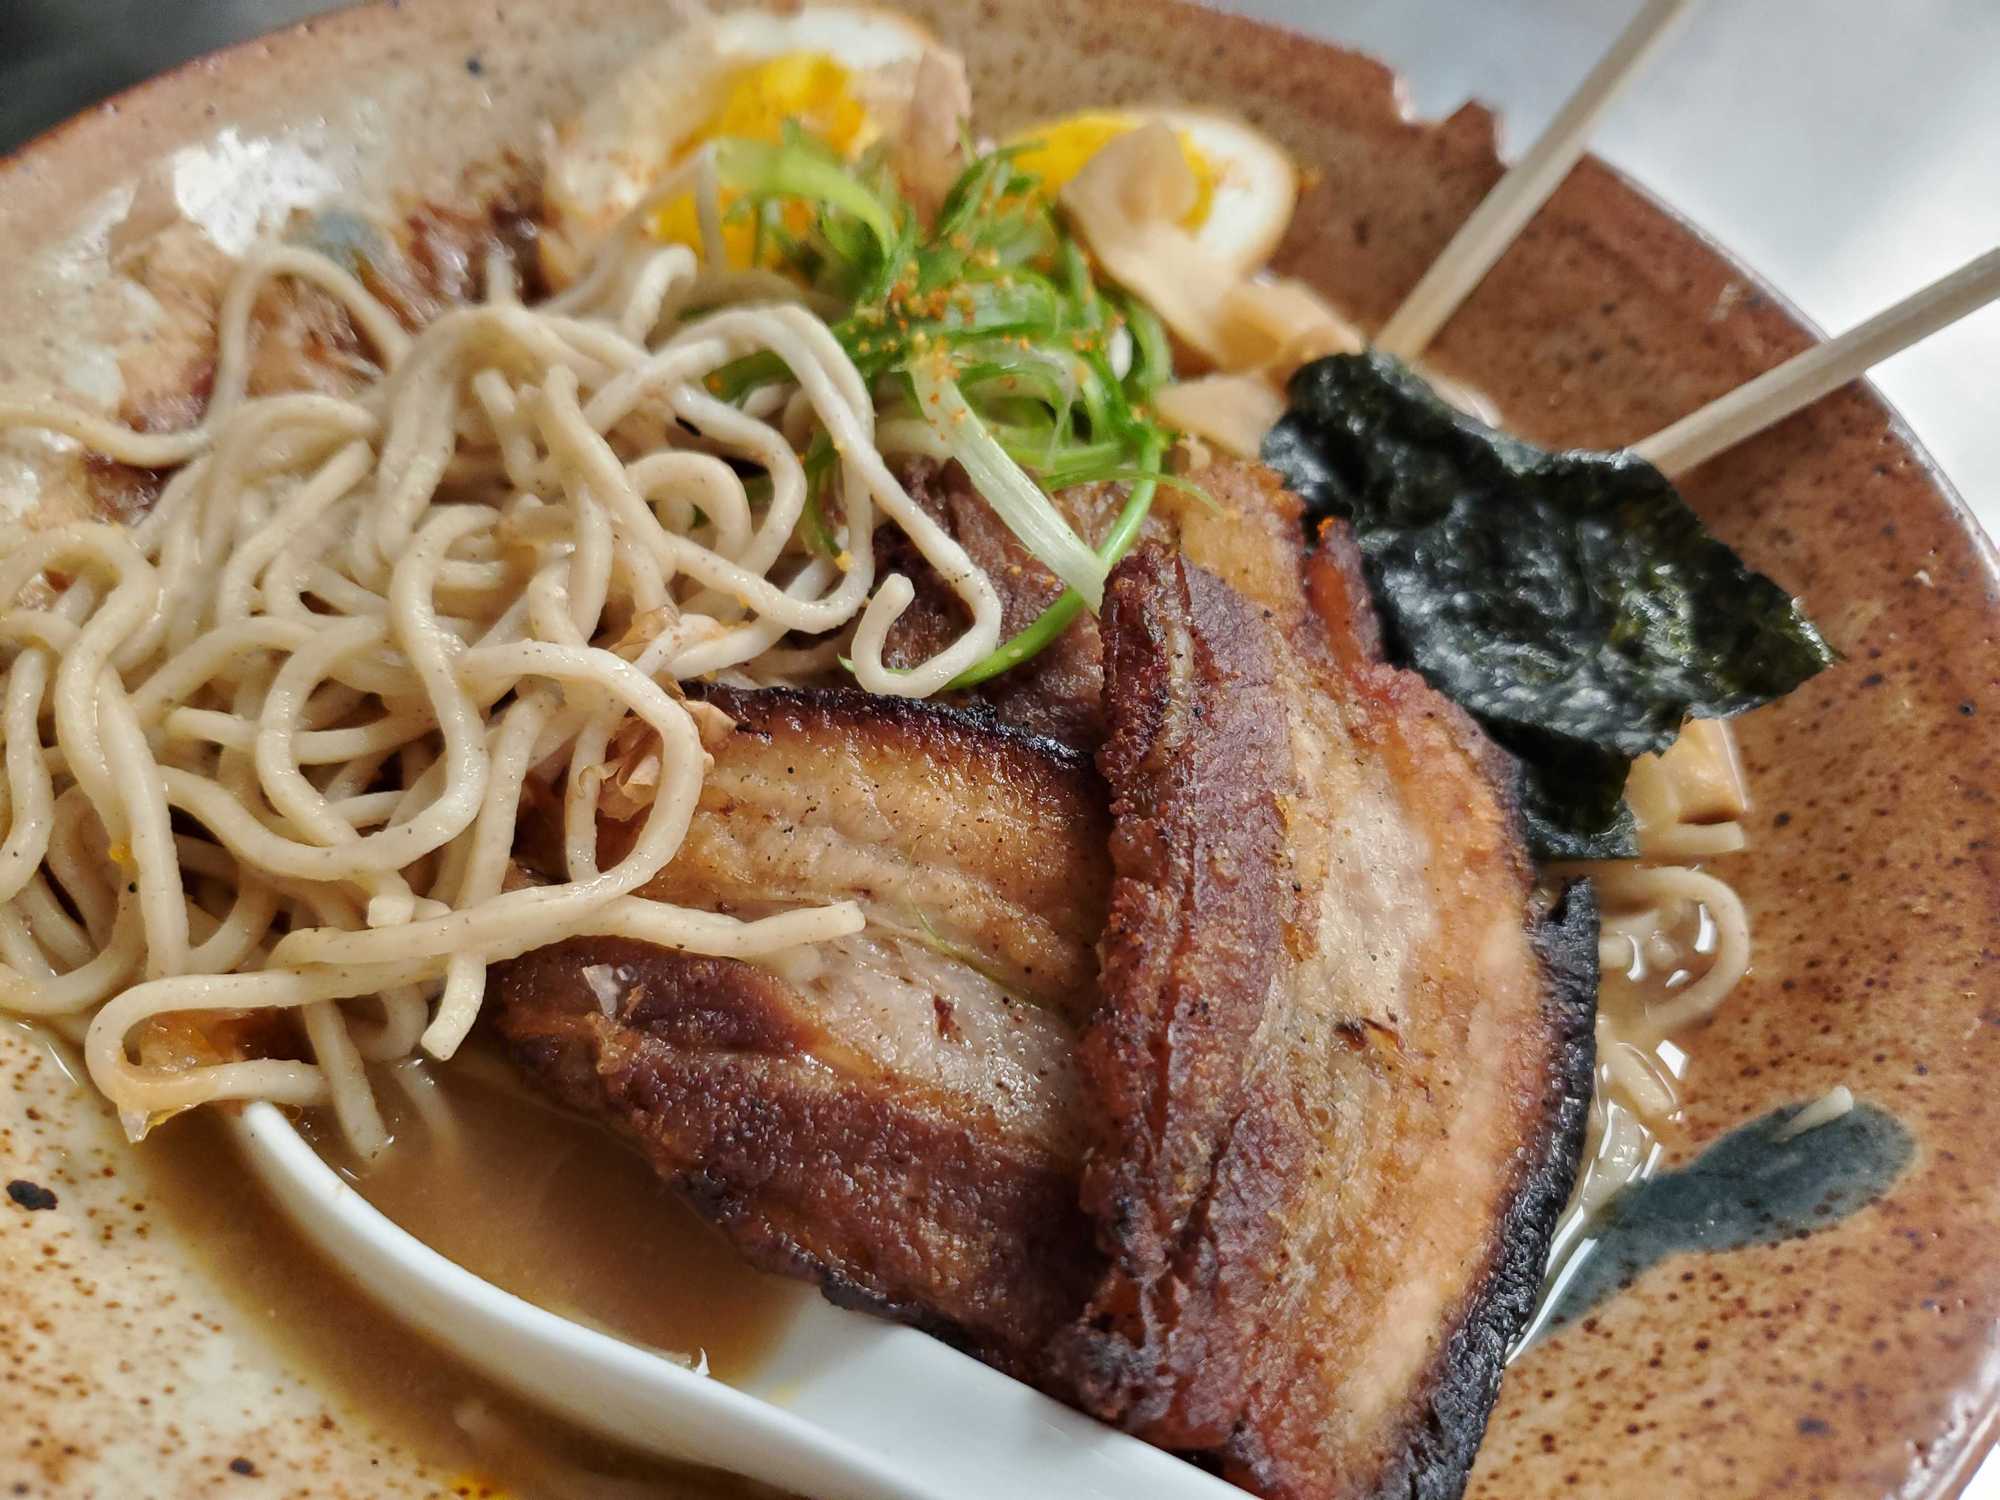 Braised pork belly and soba noodles from Obochan Noodles & Fried Chicken at Potluck, Rosedale Center's new food hall